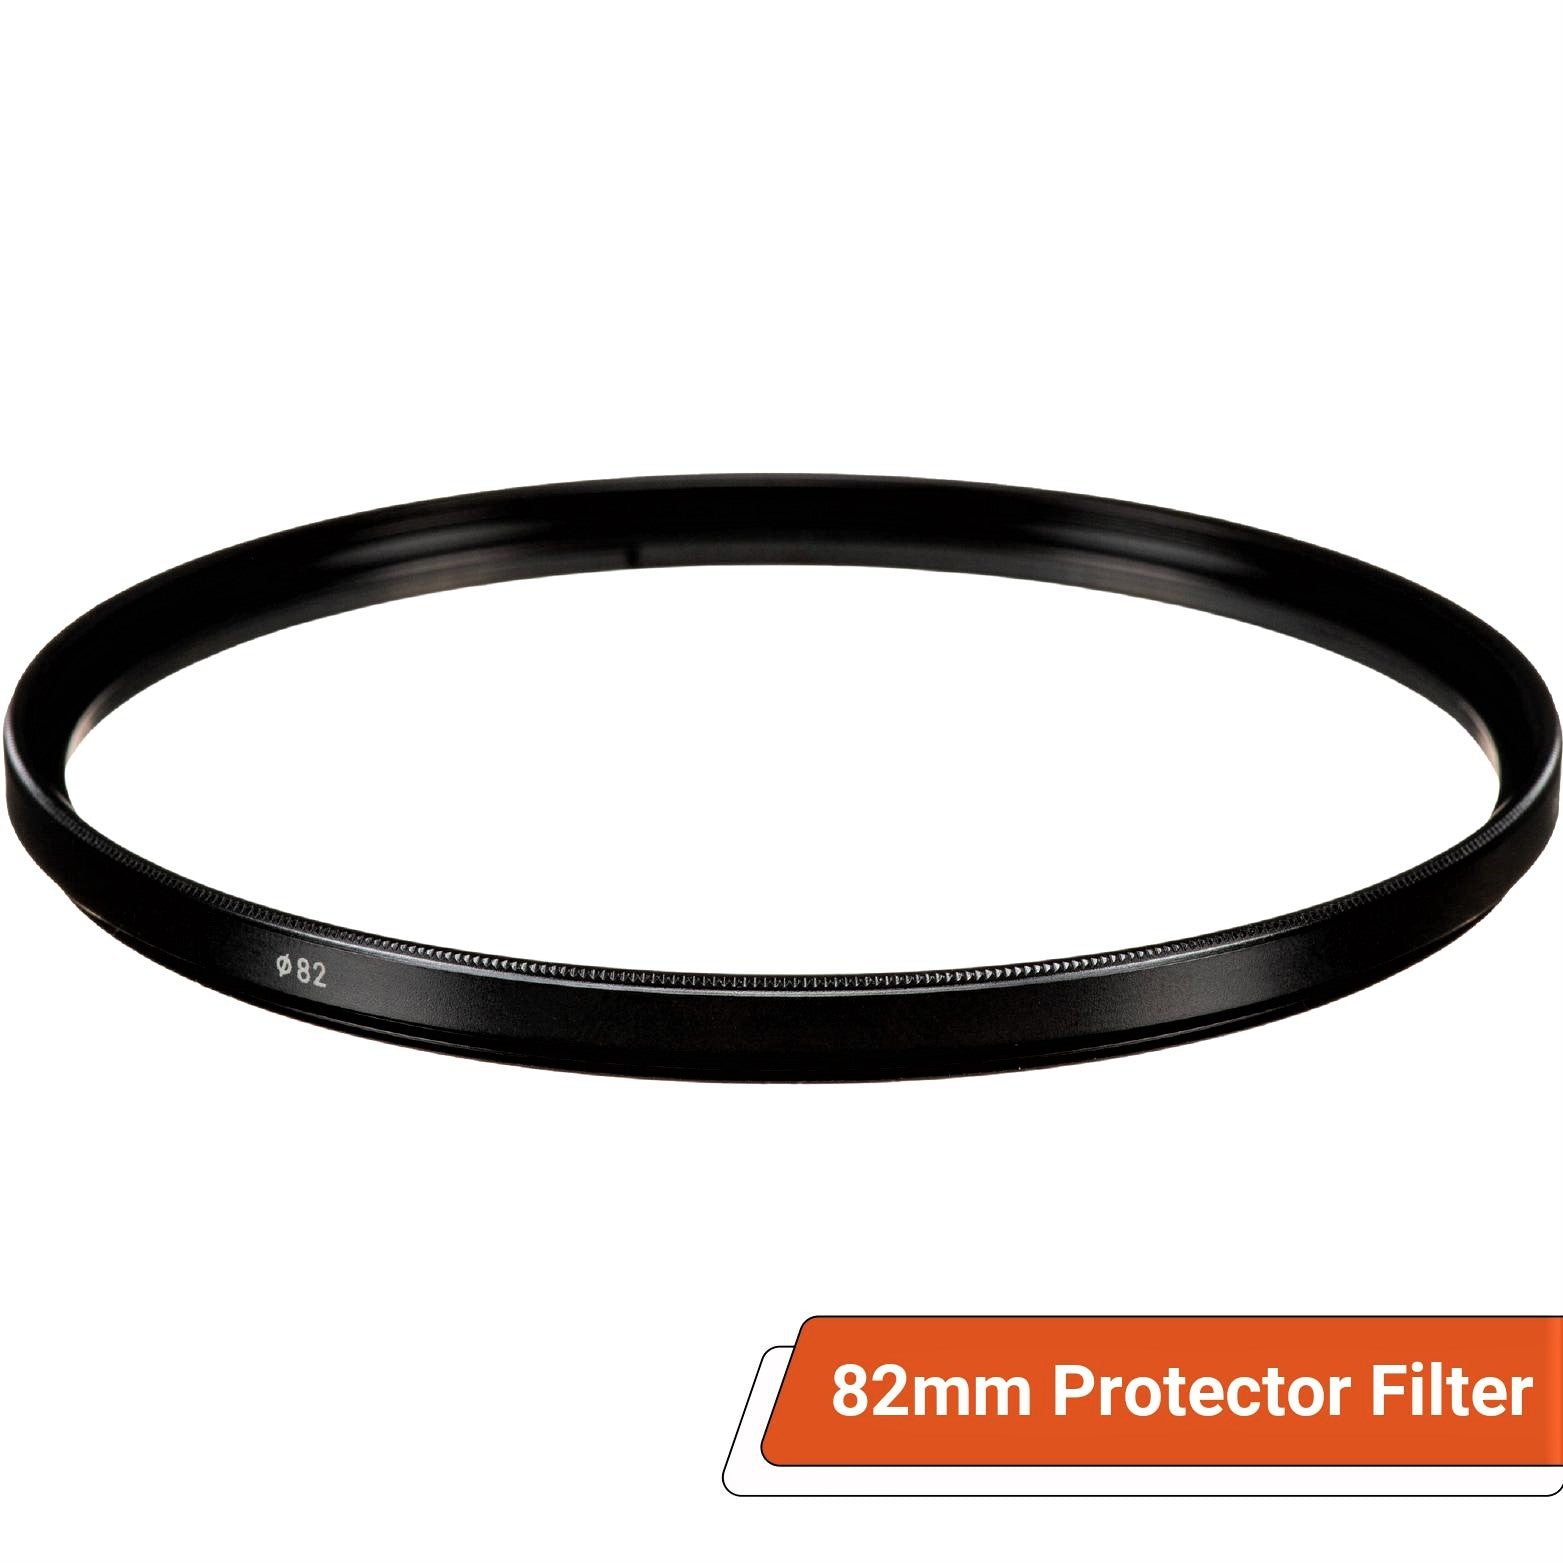 Sigma 82mm Protector Filter